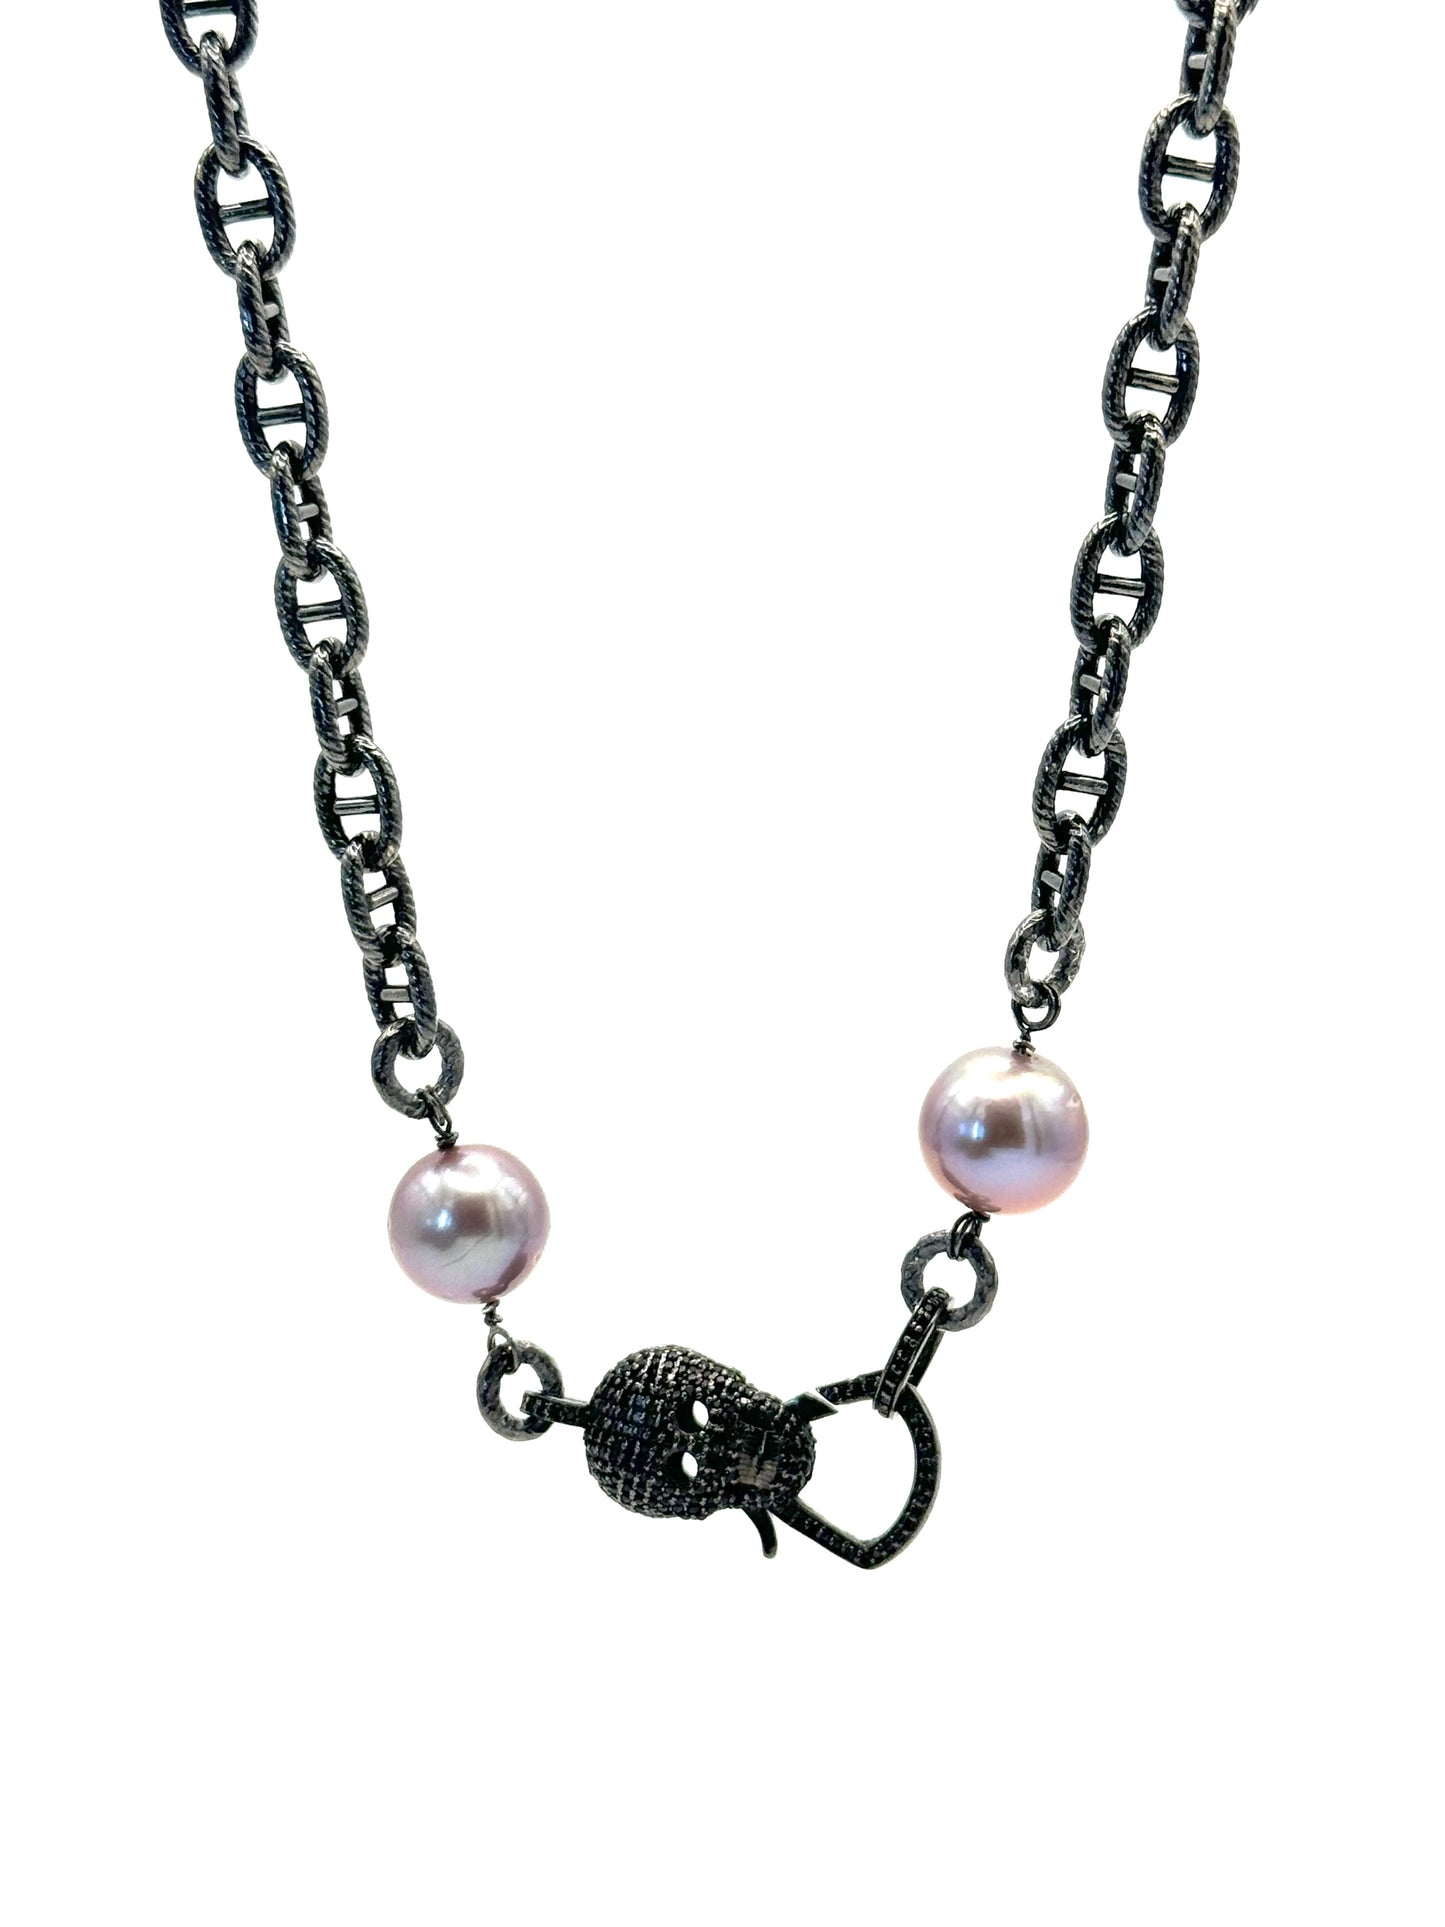 Midnight Enchantment Necklace: Black Rhodium Mariner Link Chain with Pink Edison Pearls and Black Spinel Skull Clasp